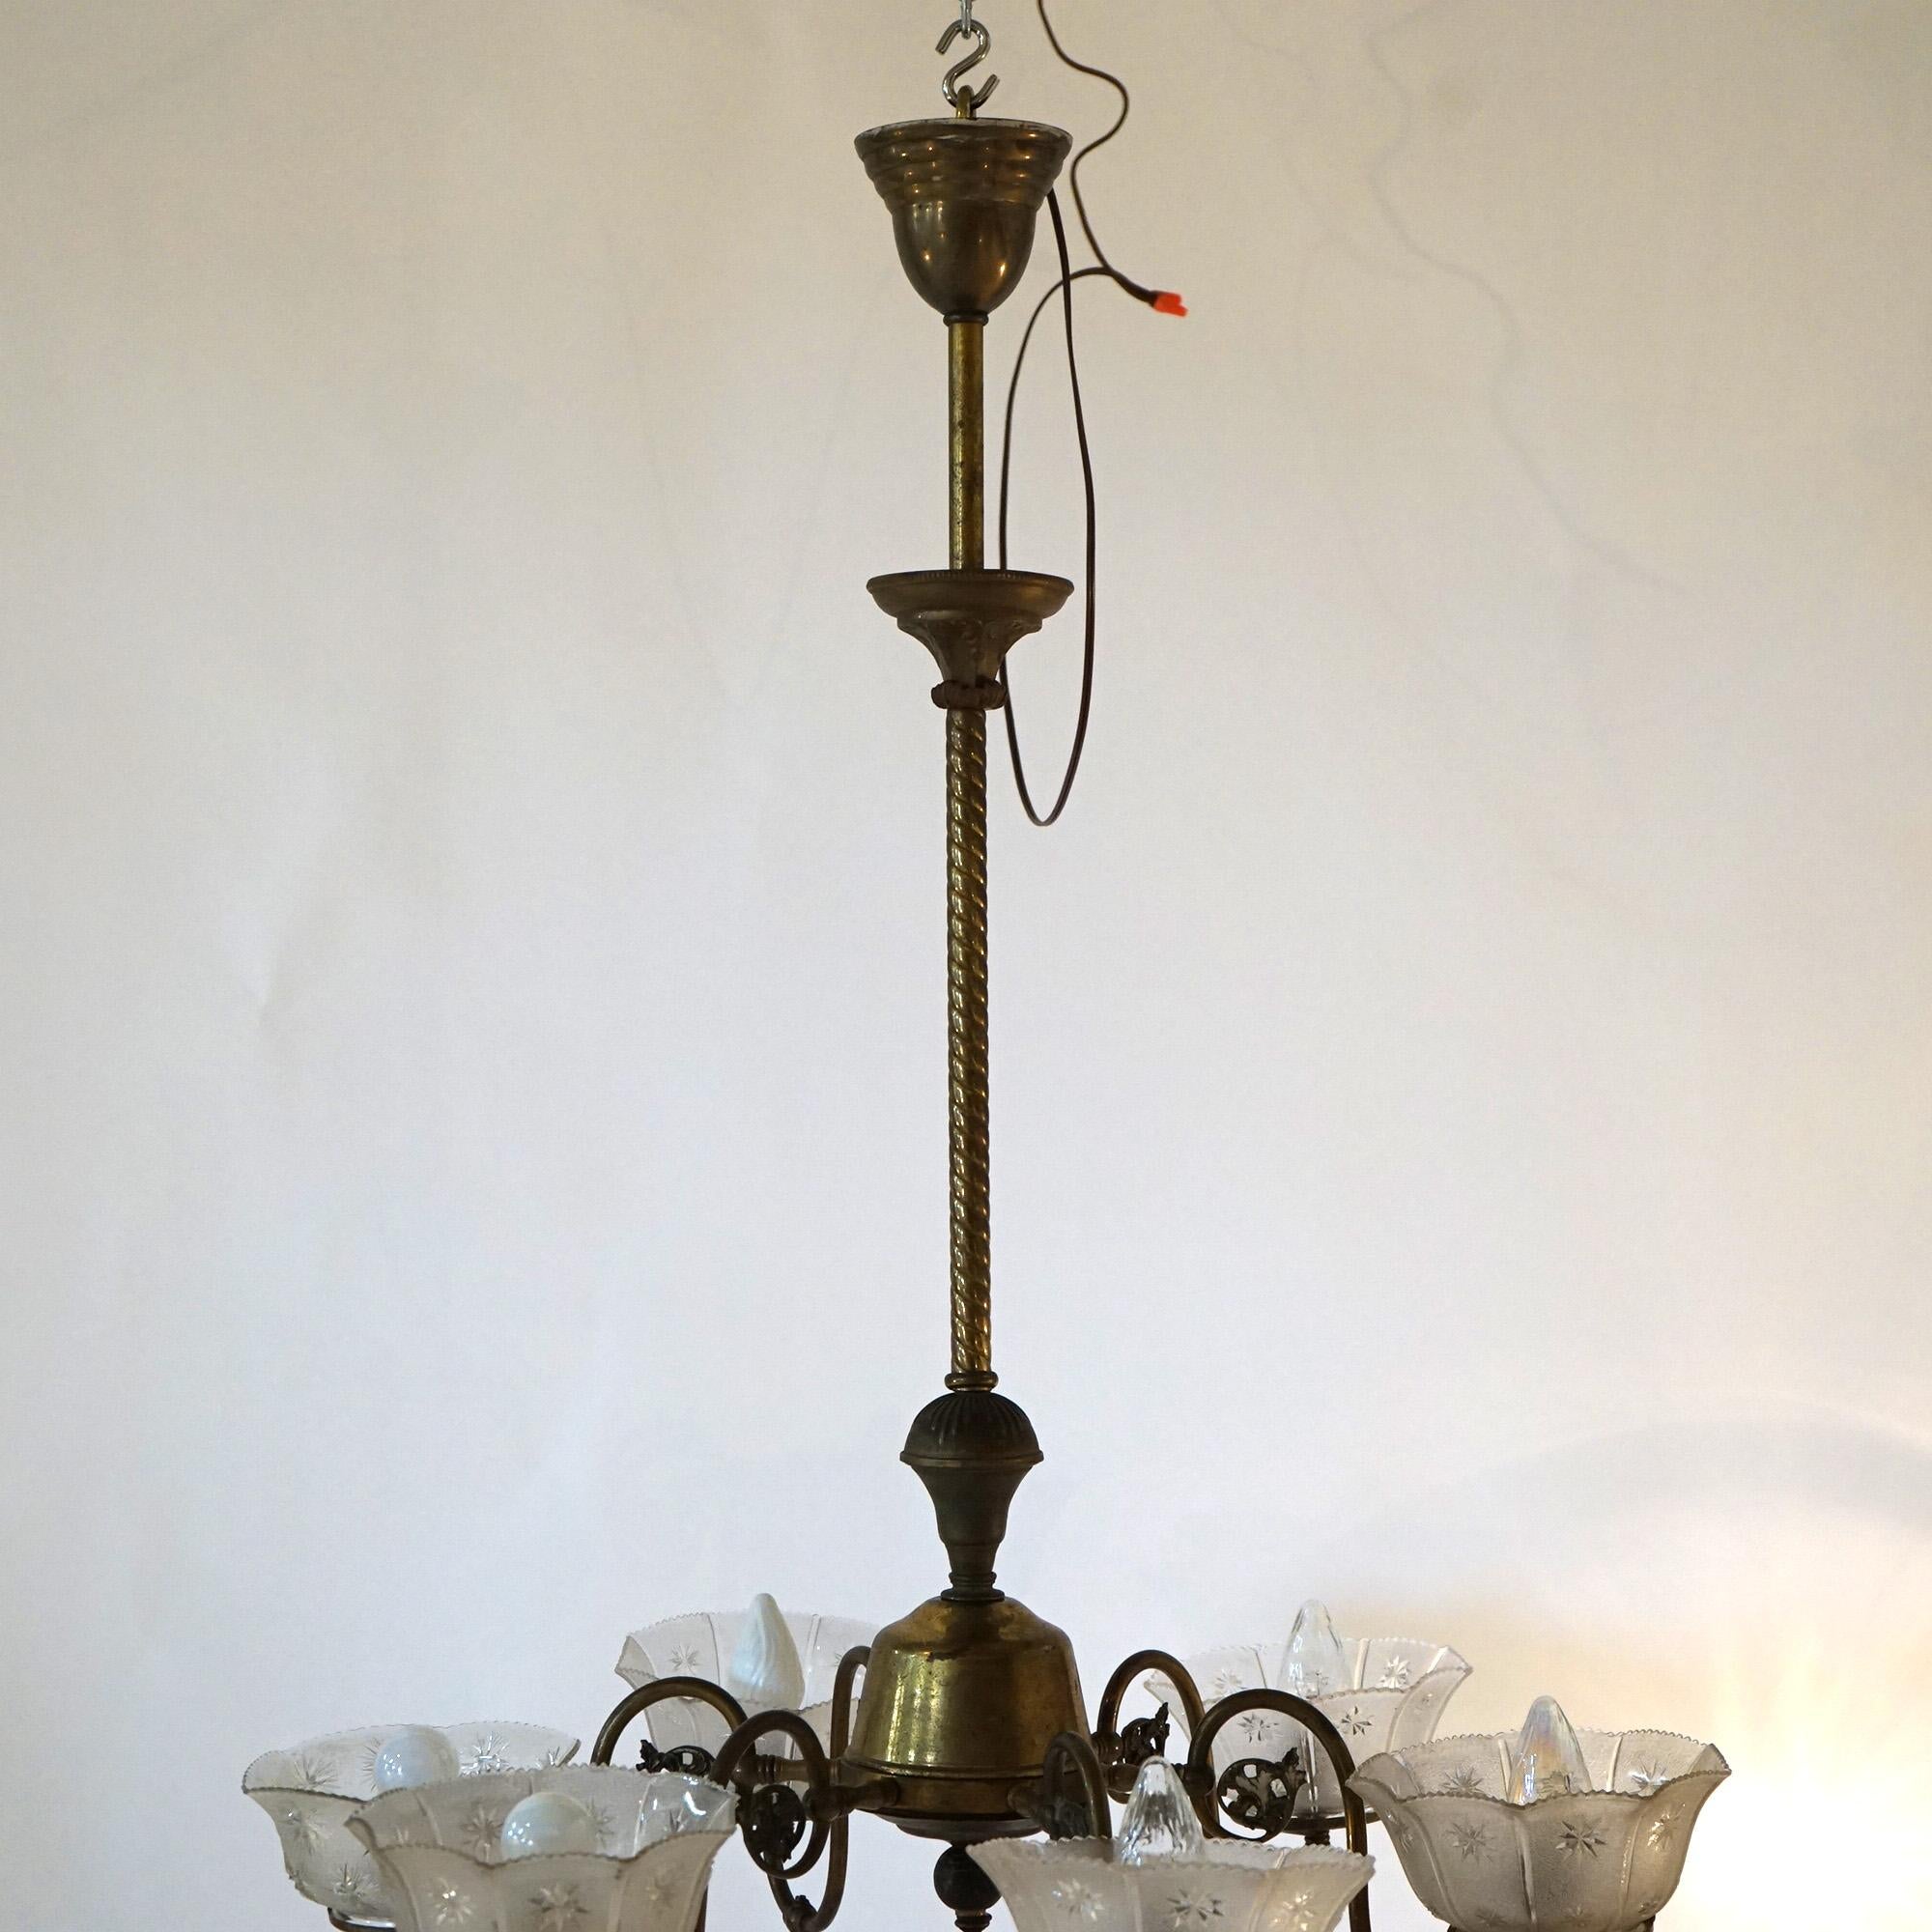 Antique Six Arm Brass Gas Chandelier with Glass Shades, Electrified, Circa 1890 12